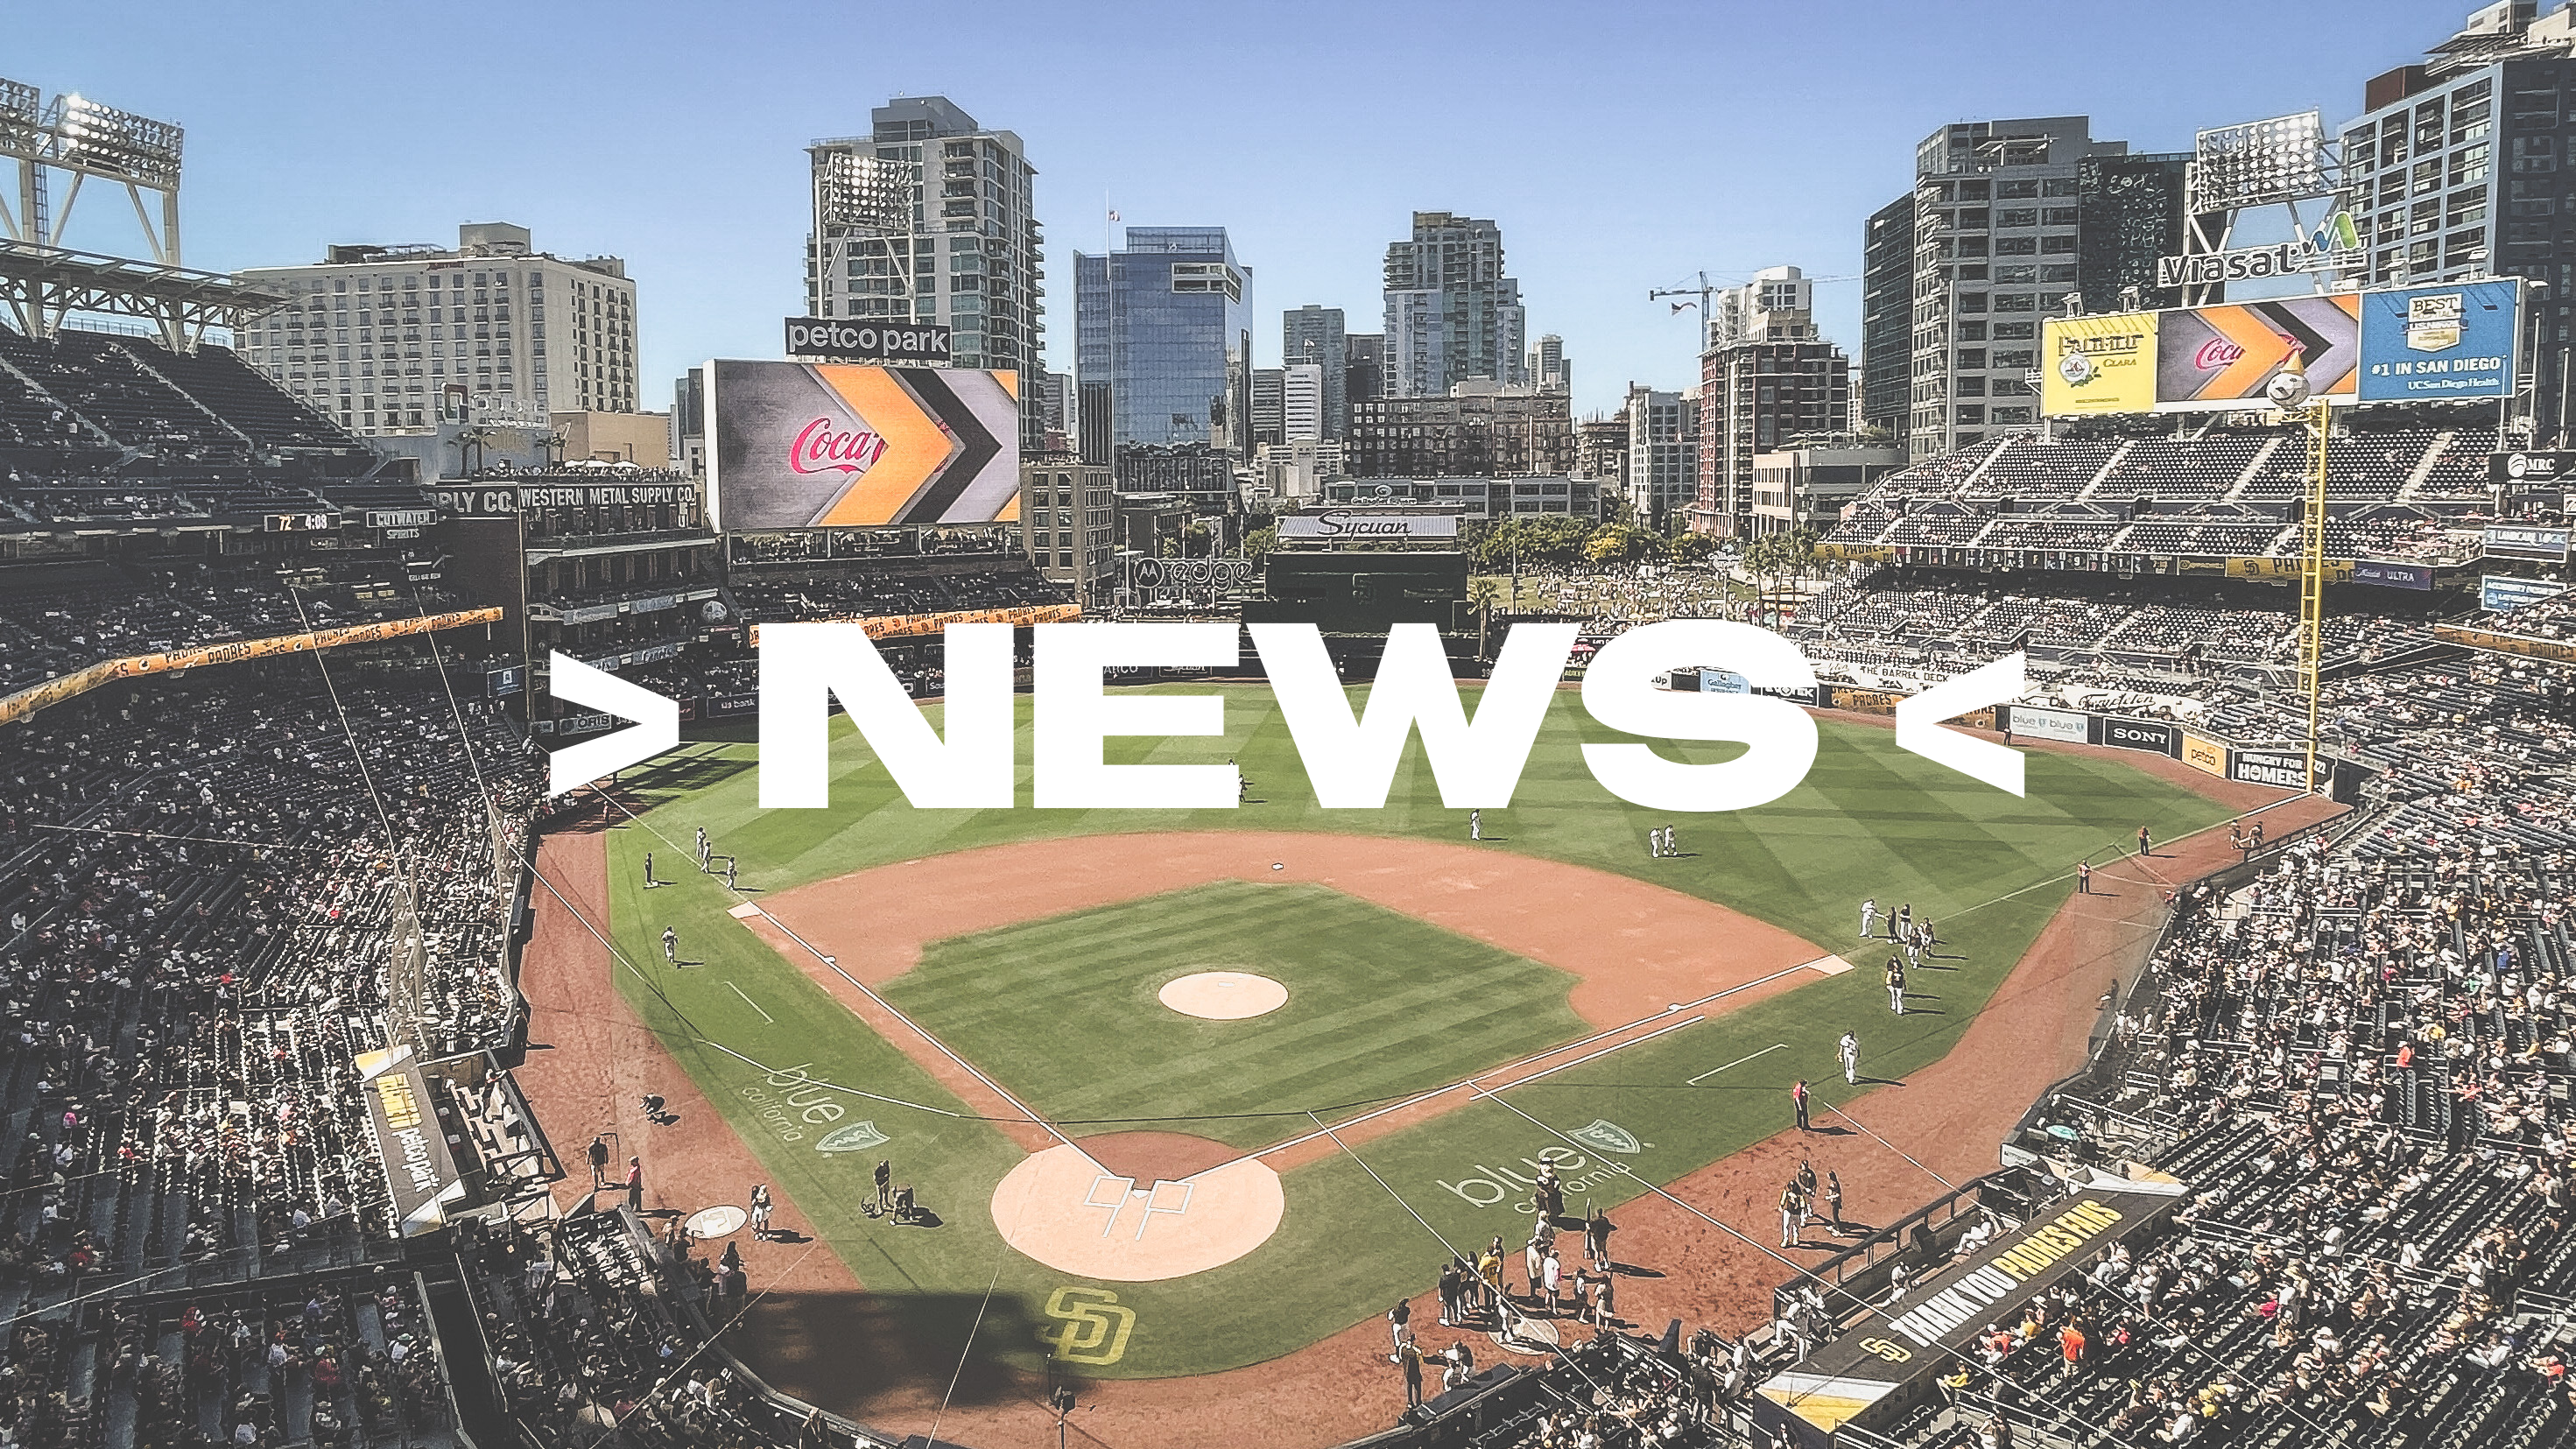 “News” in all caps across a faded photo of Petco Park in the background.